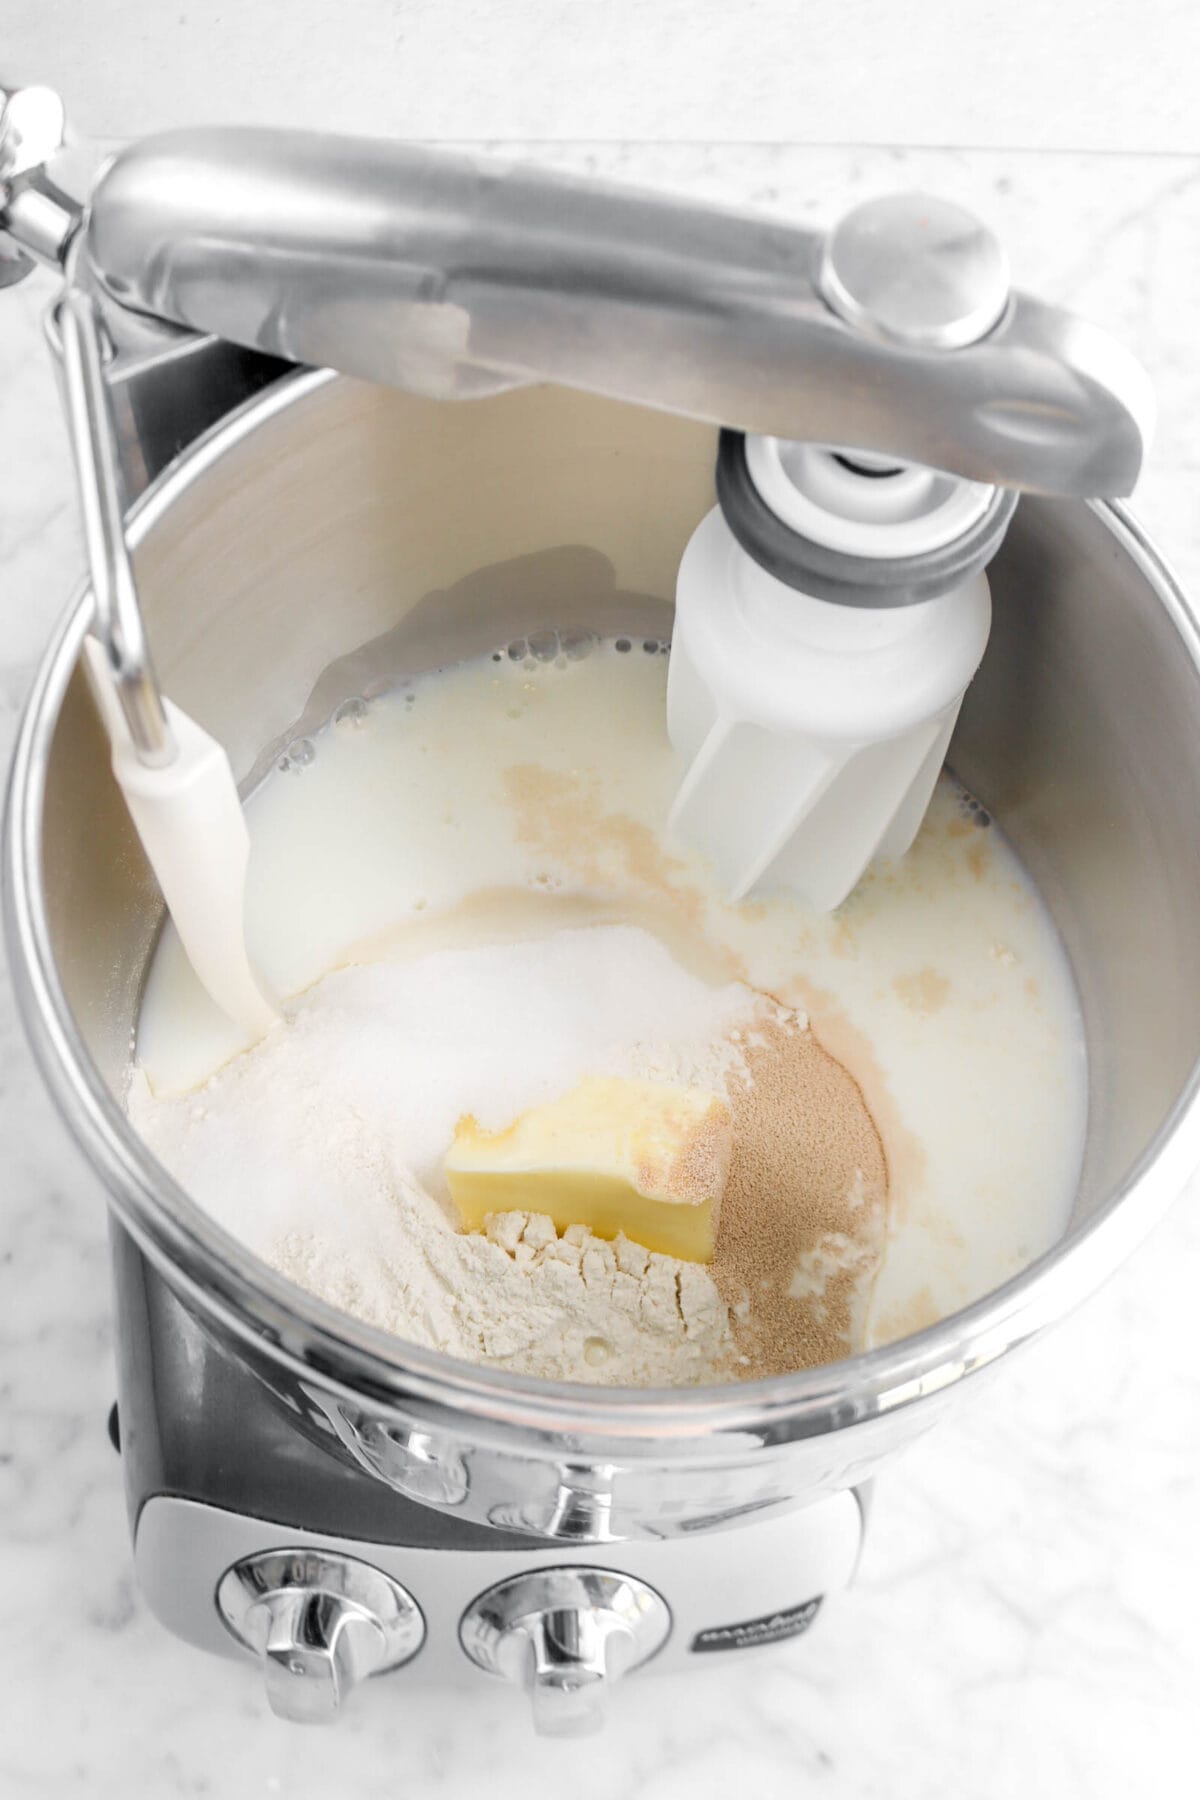 milk, butter, sugar, yeast, and flour in mixer bowl